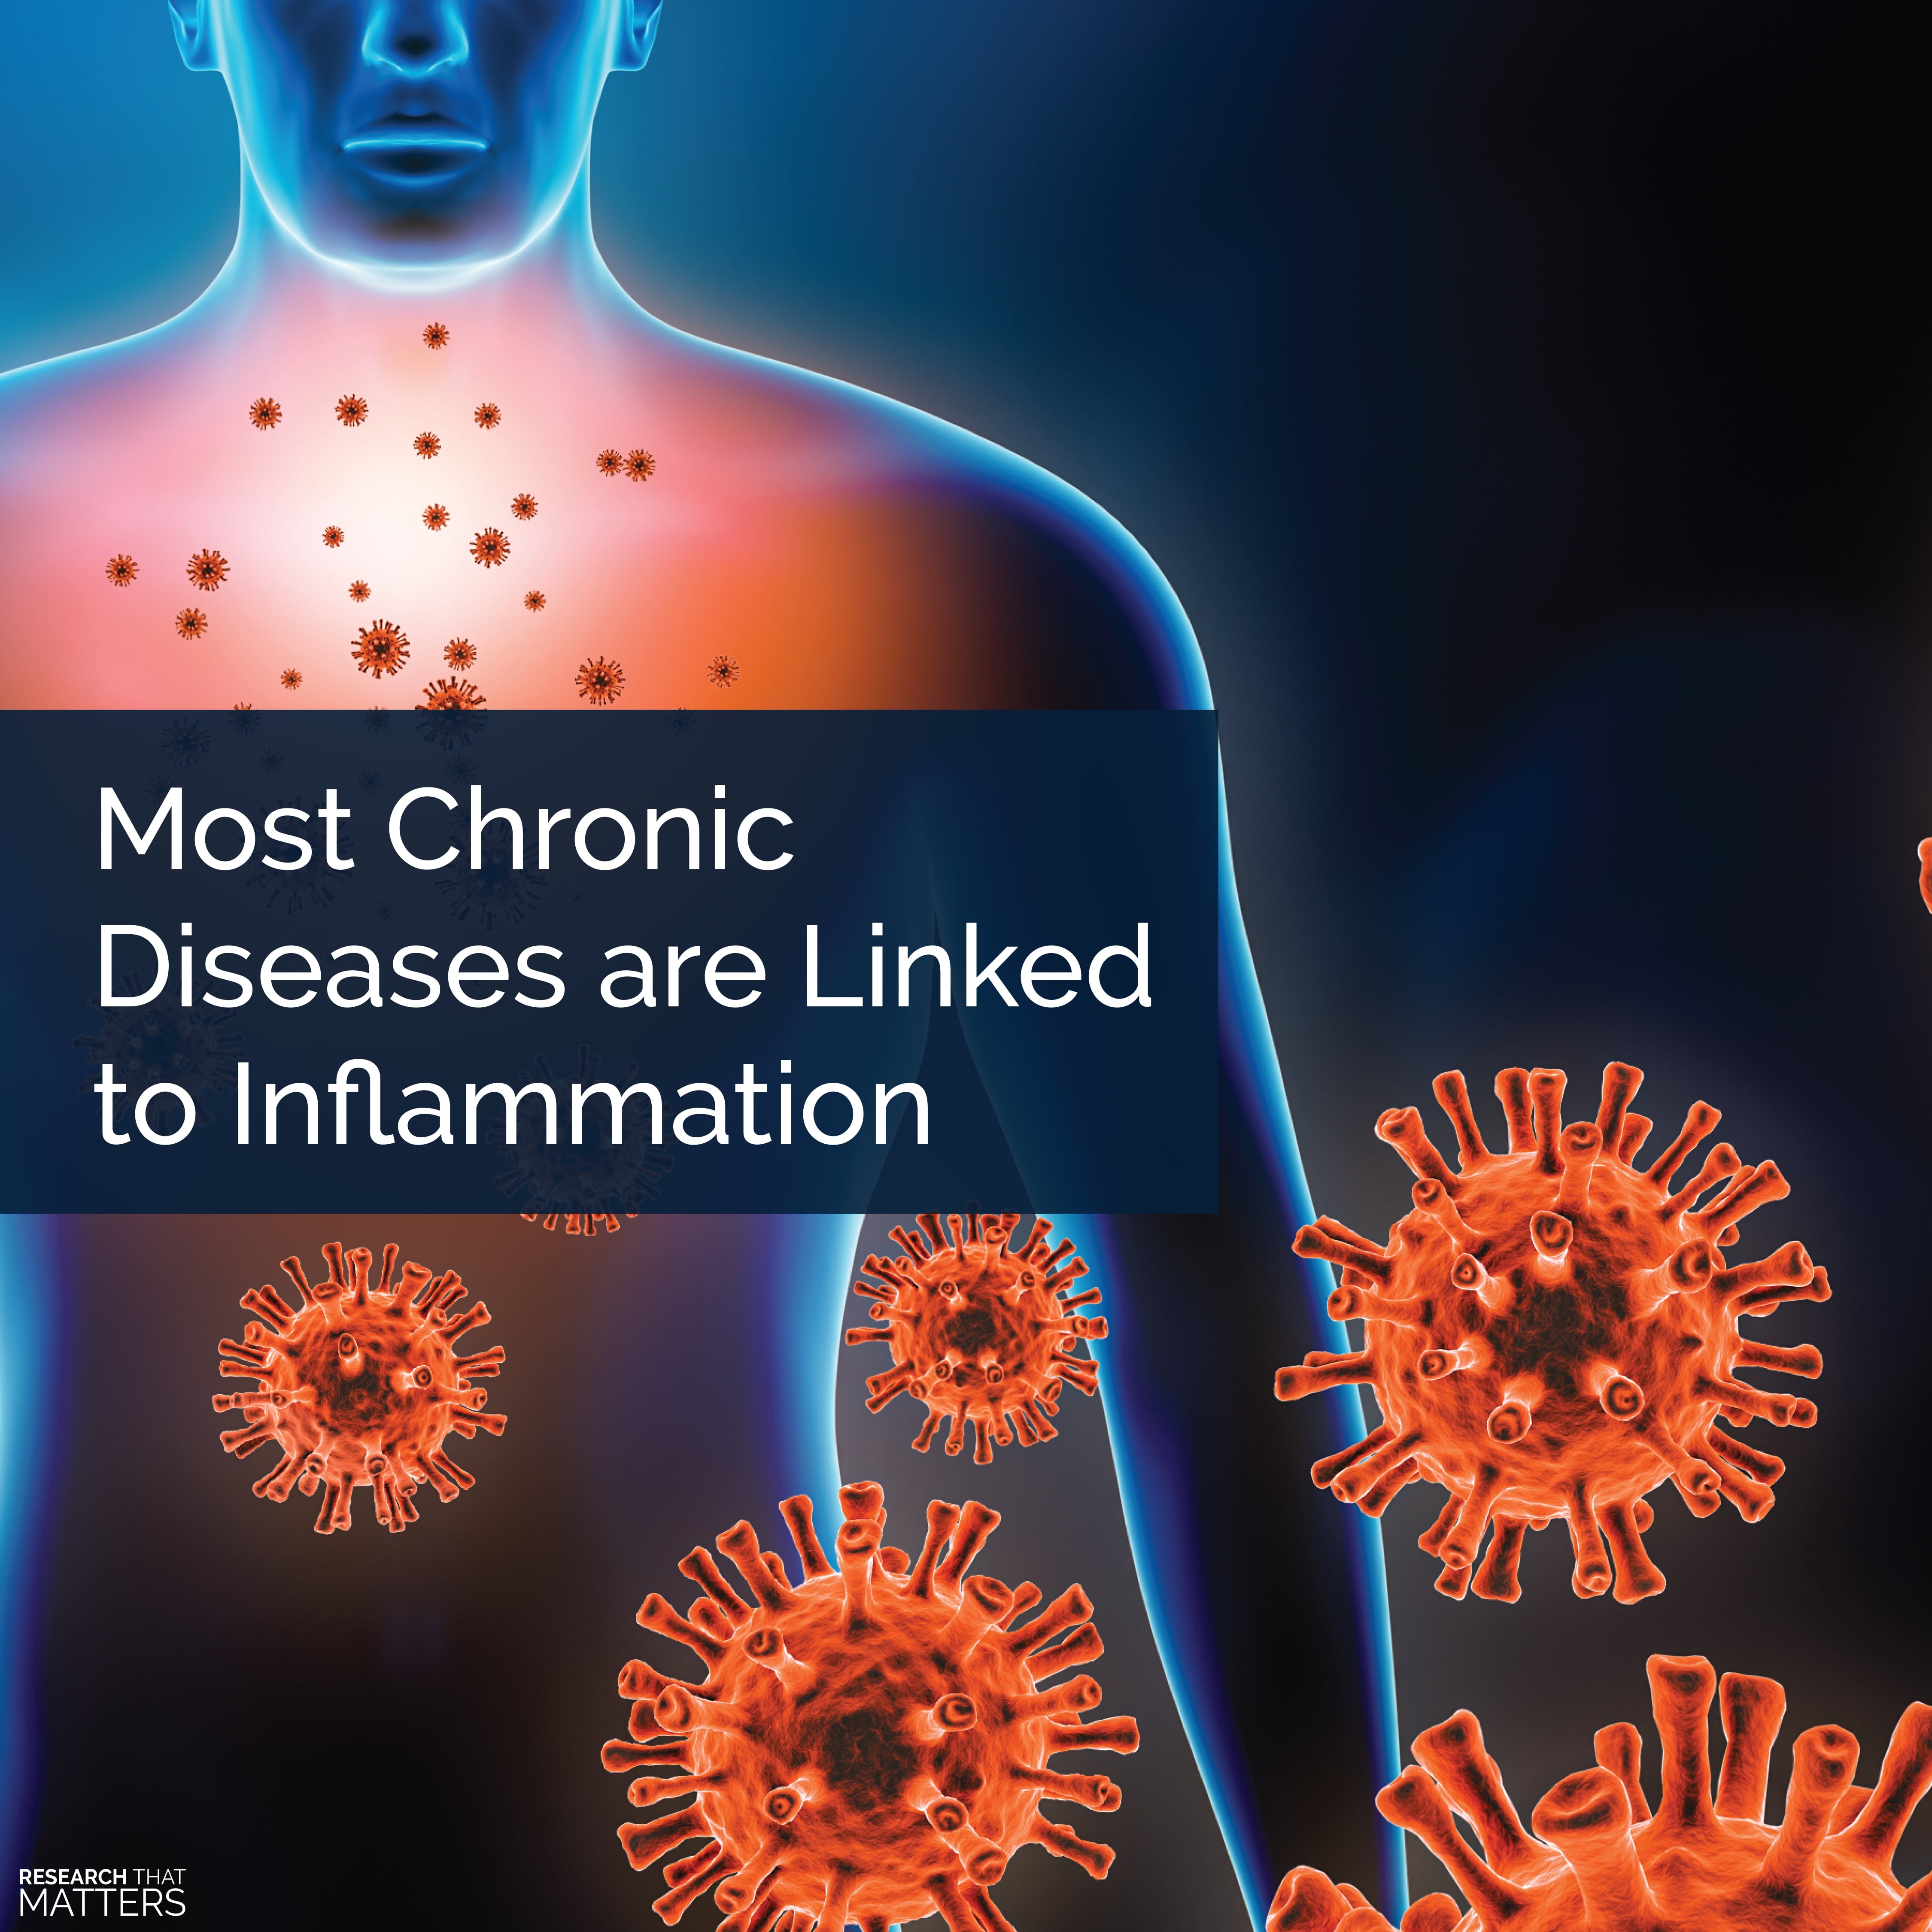 Week 2a - Most Chronic Diseases are Linked to Inflammation